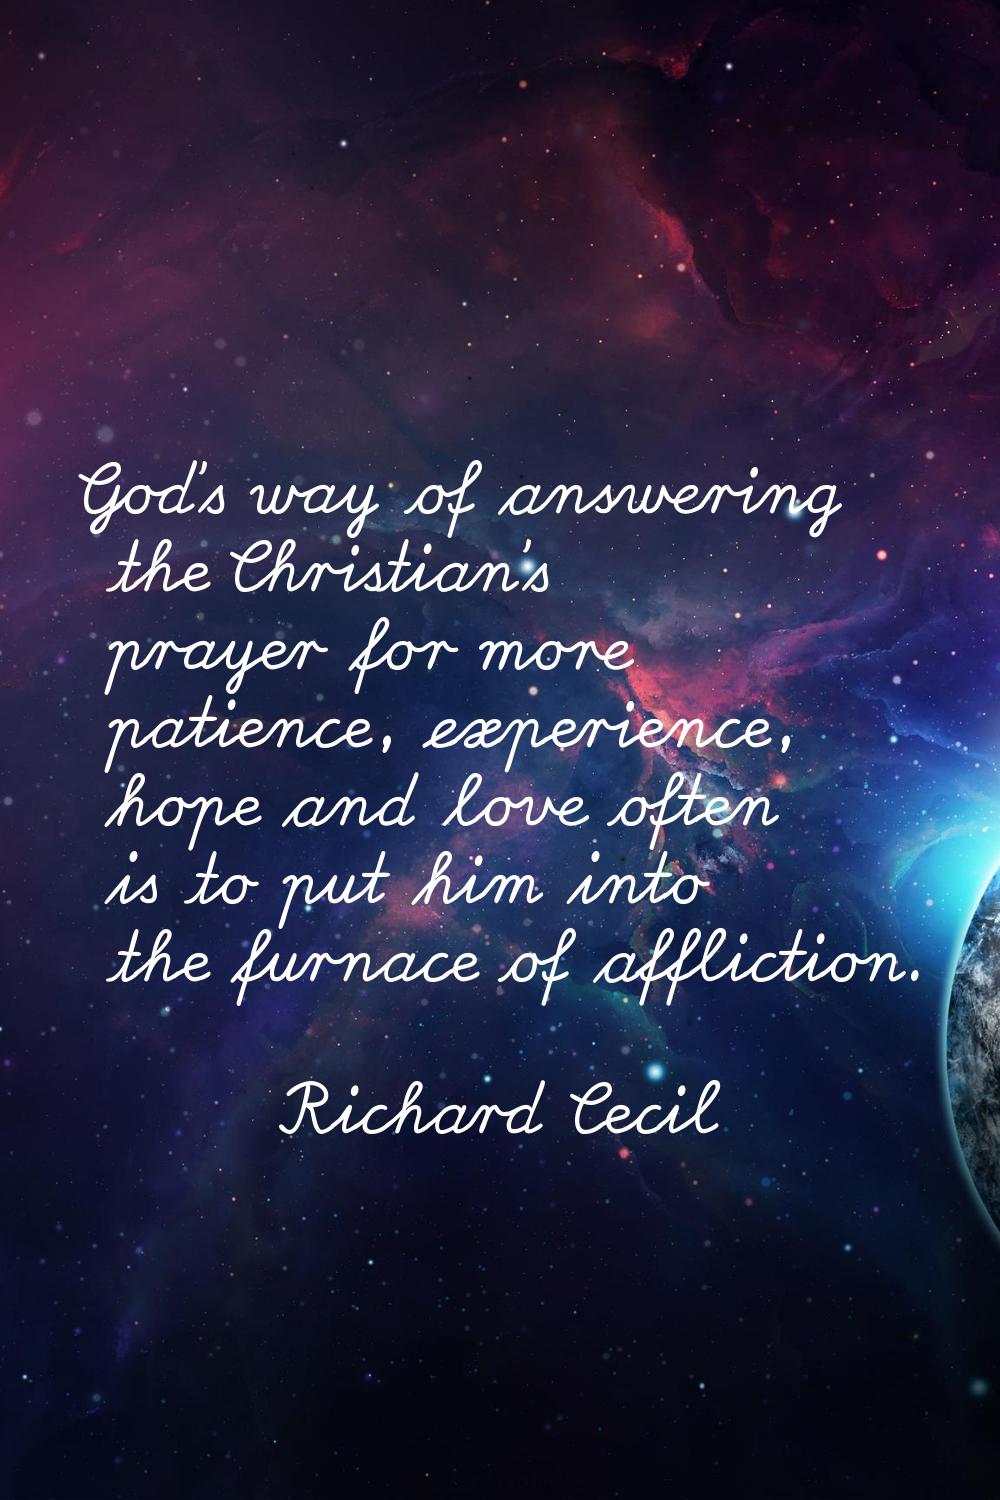 God's way of answering the Christian's prayer for more patience, experience, hope and love often is